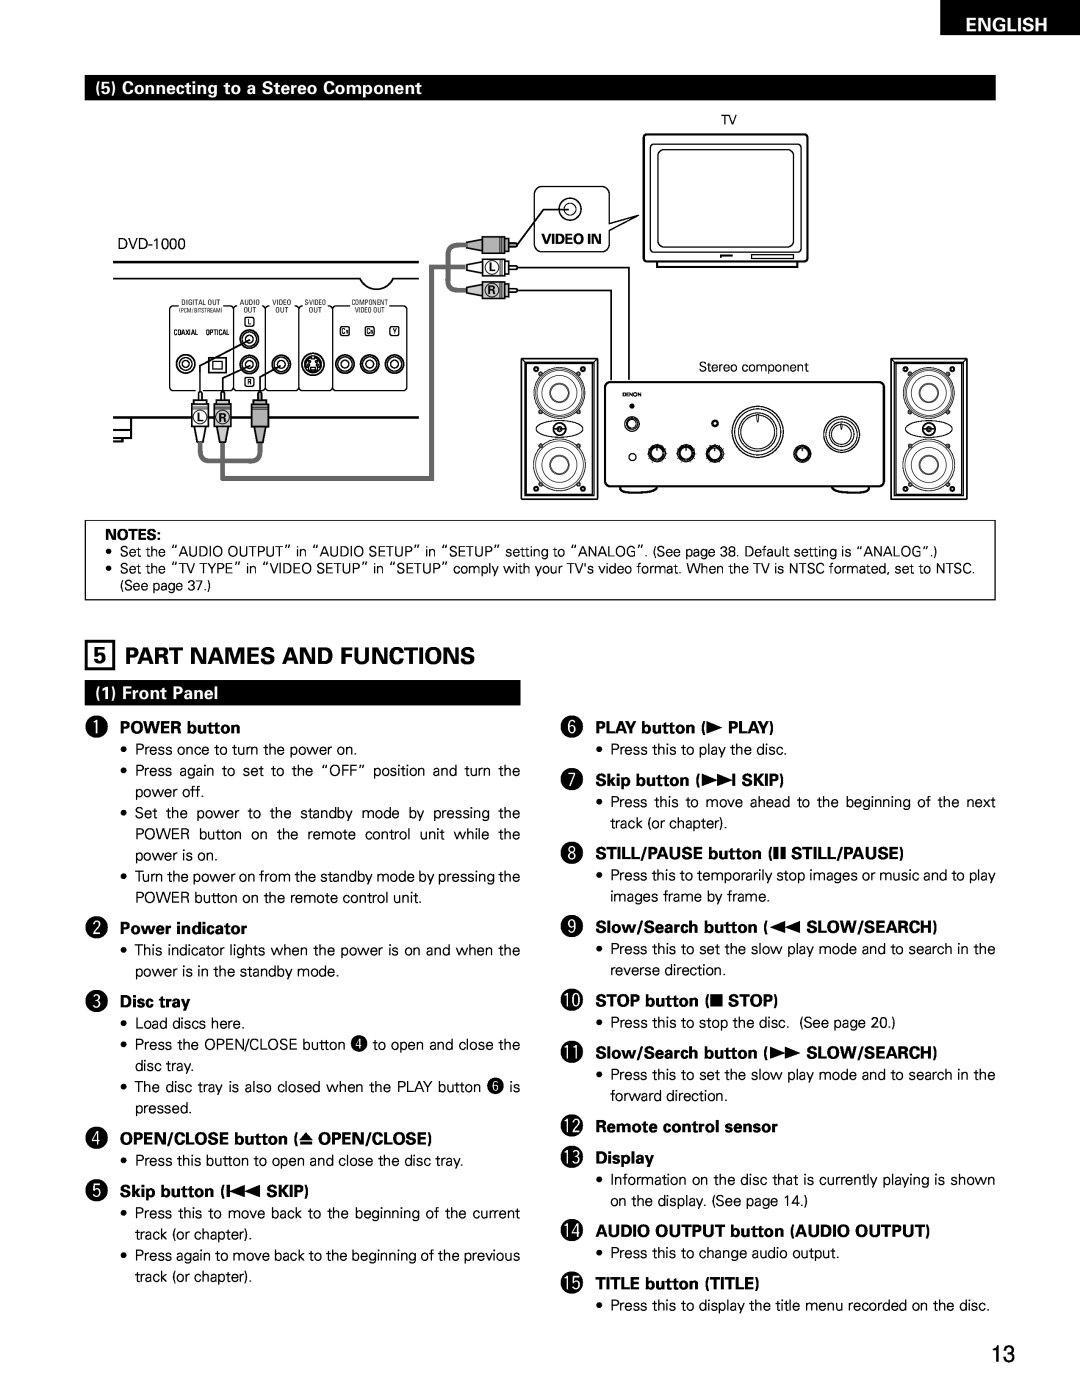 Denon DVD-1000 manual Part Names And Functions, Connecting to a Stereo Component, Front Panel, English 